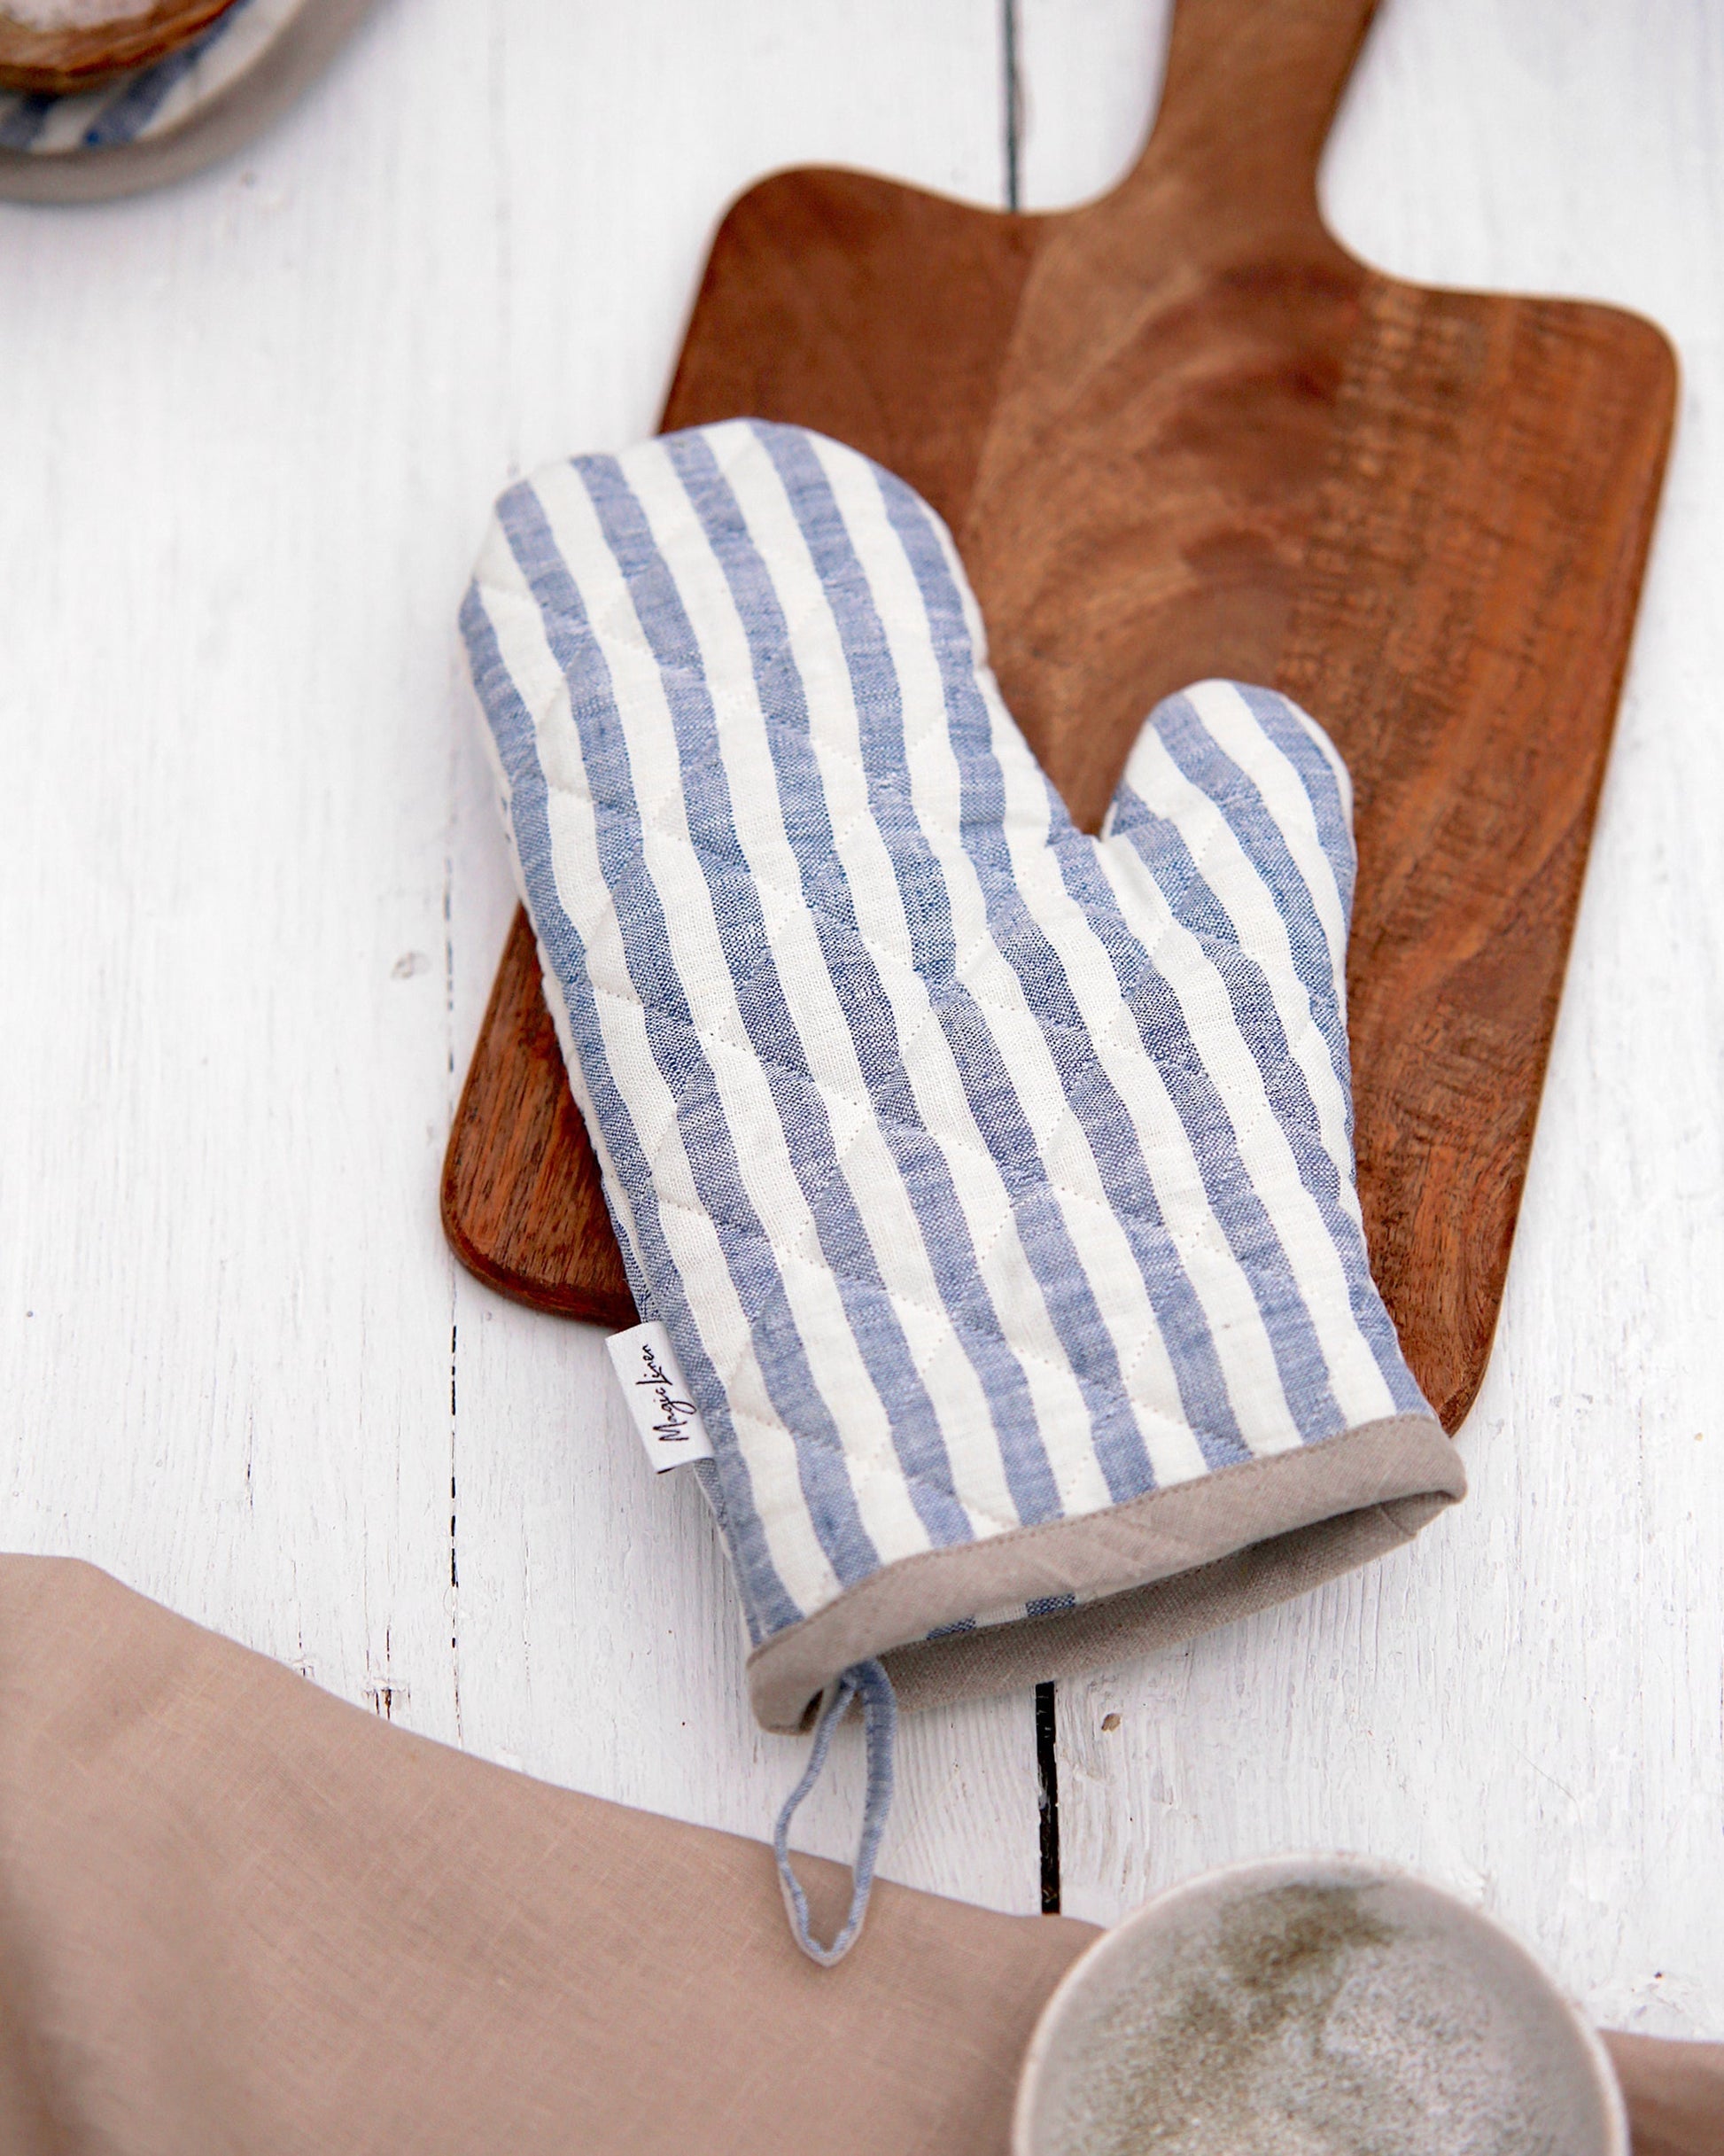 MagicLinen Linen Oven Mitt in Charcoal Gray at Urban Outfitters